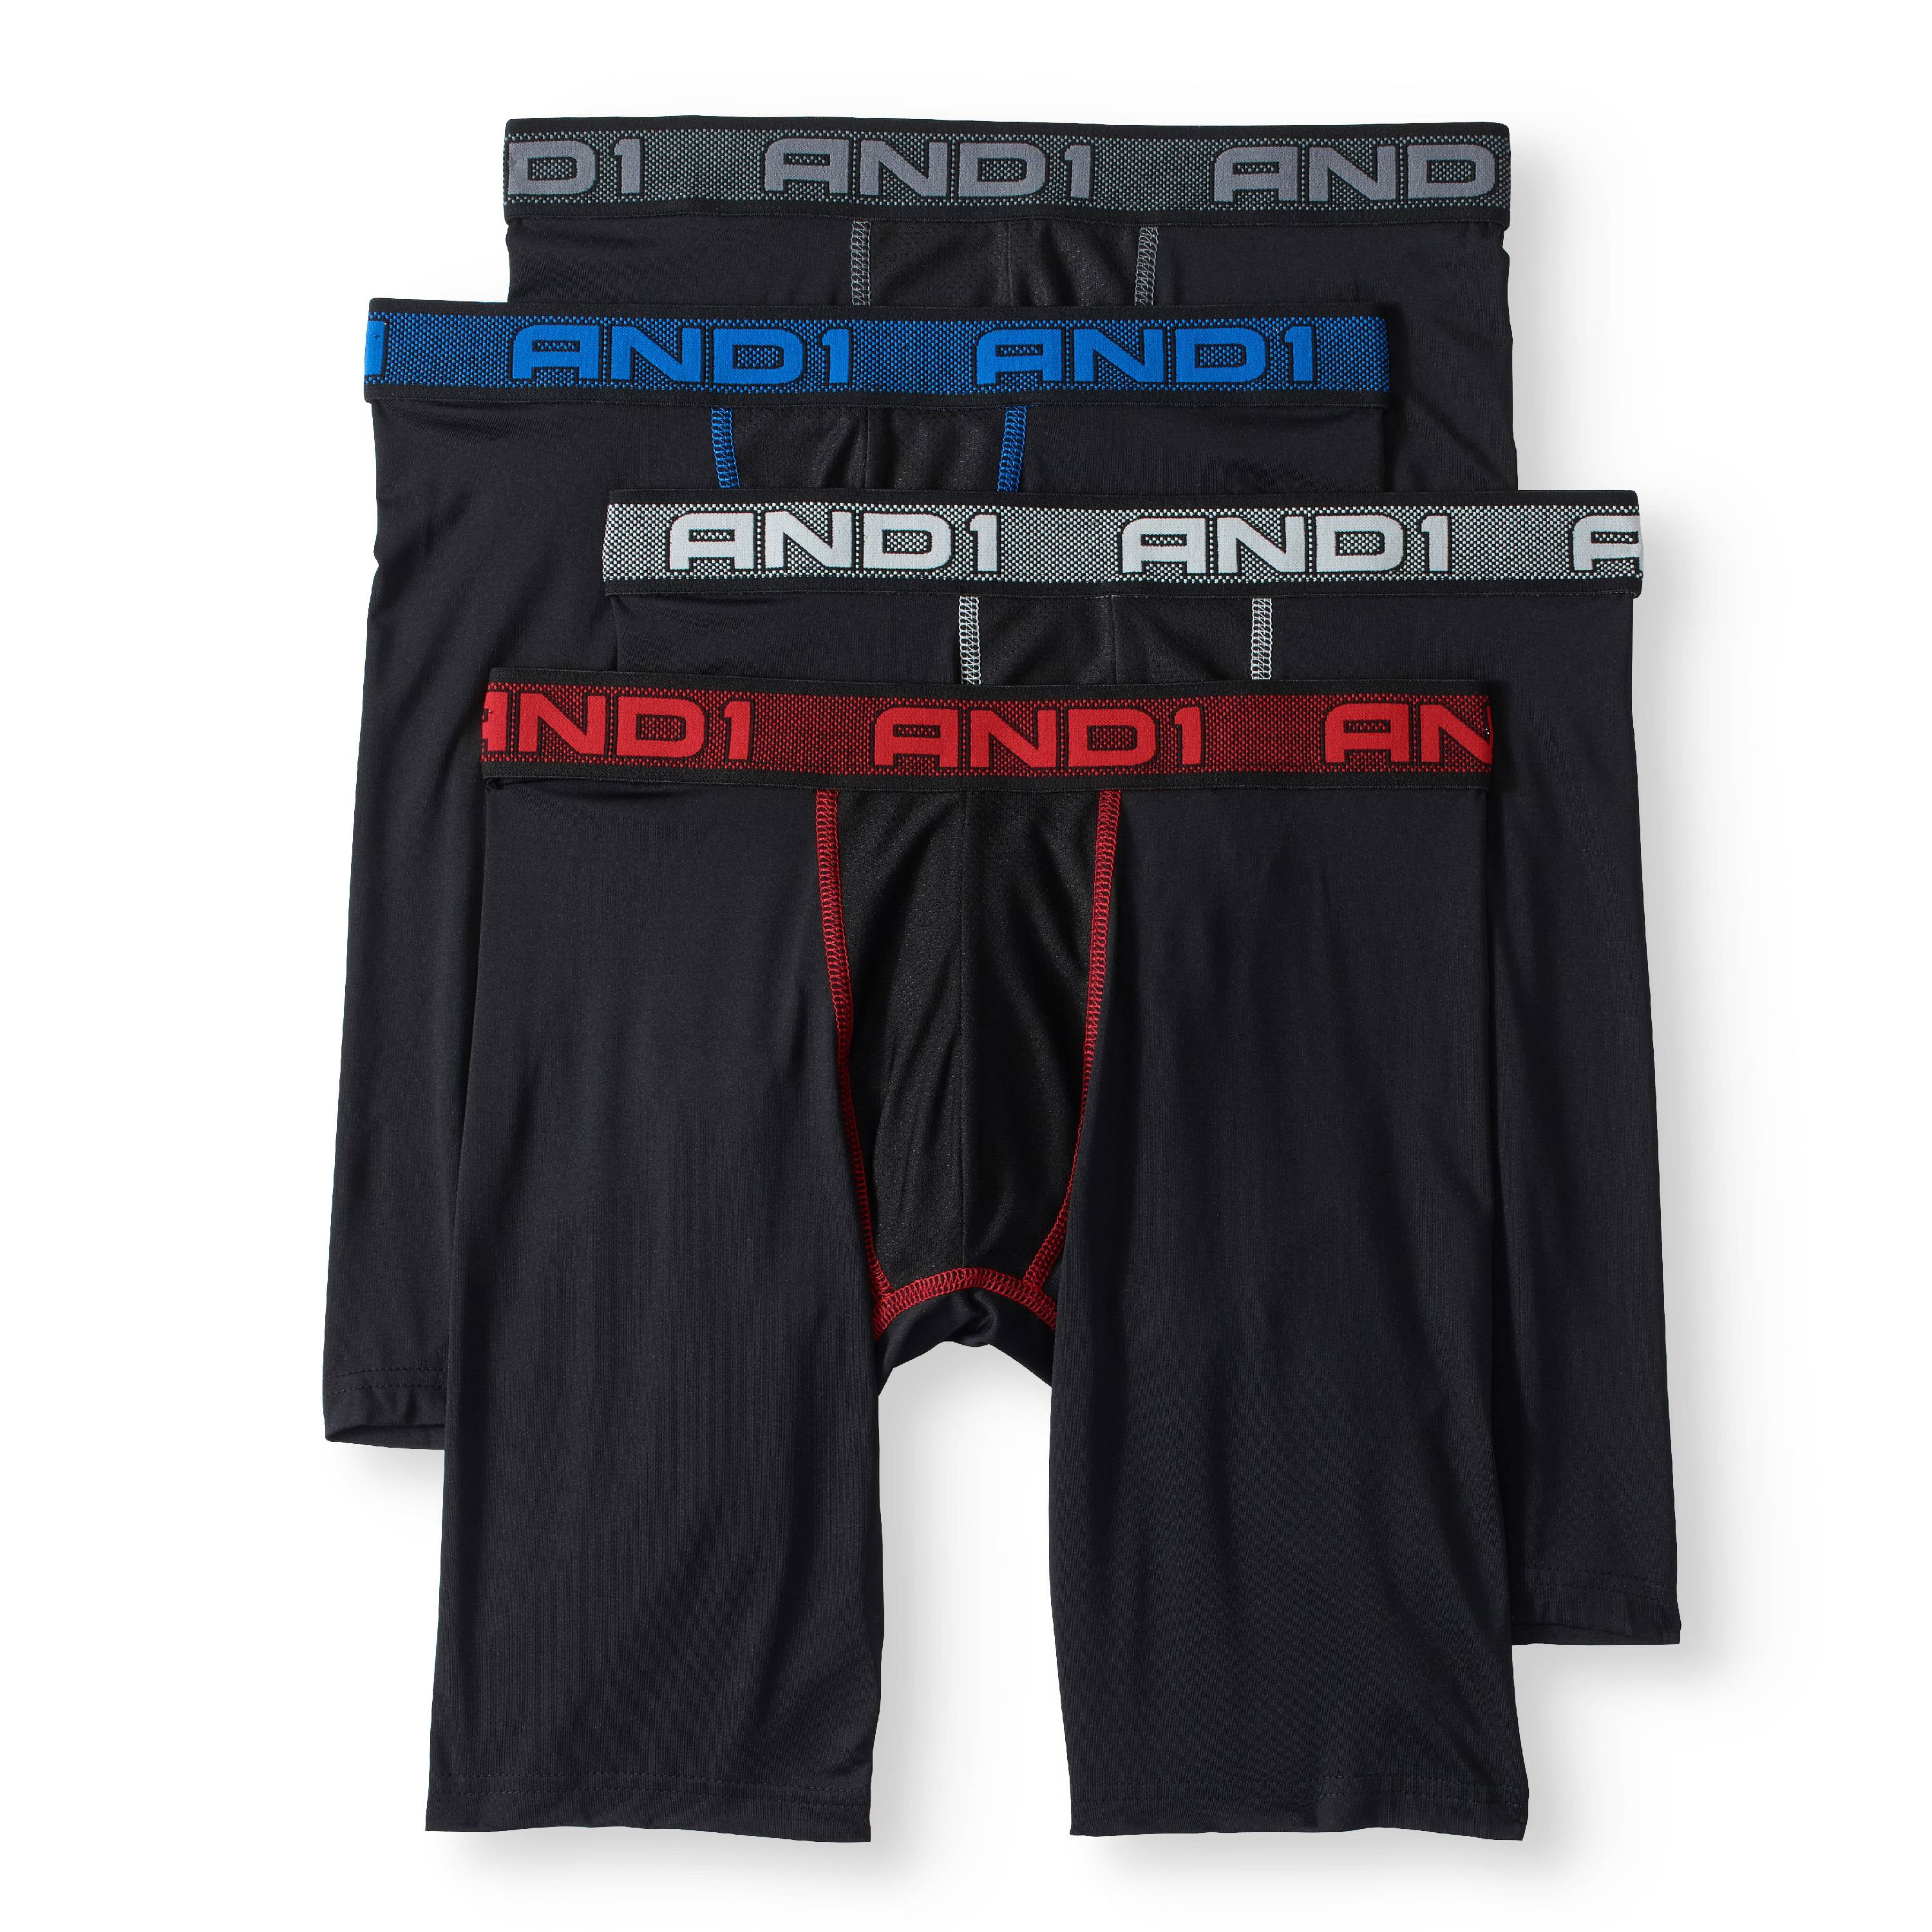 AND1 Men's Performance Long Length Boxer Briefs with Contour Pouch, 4-Pack  